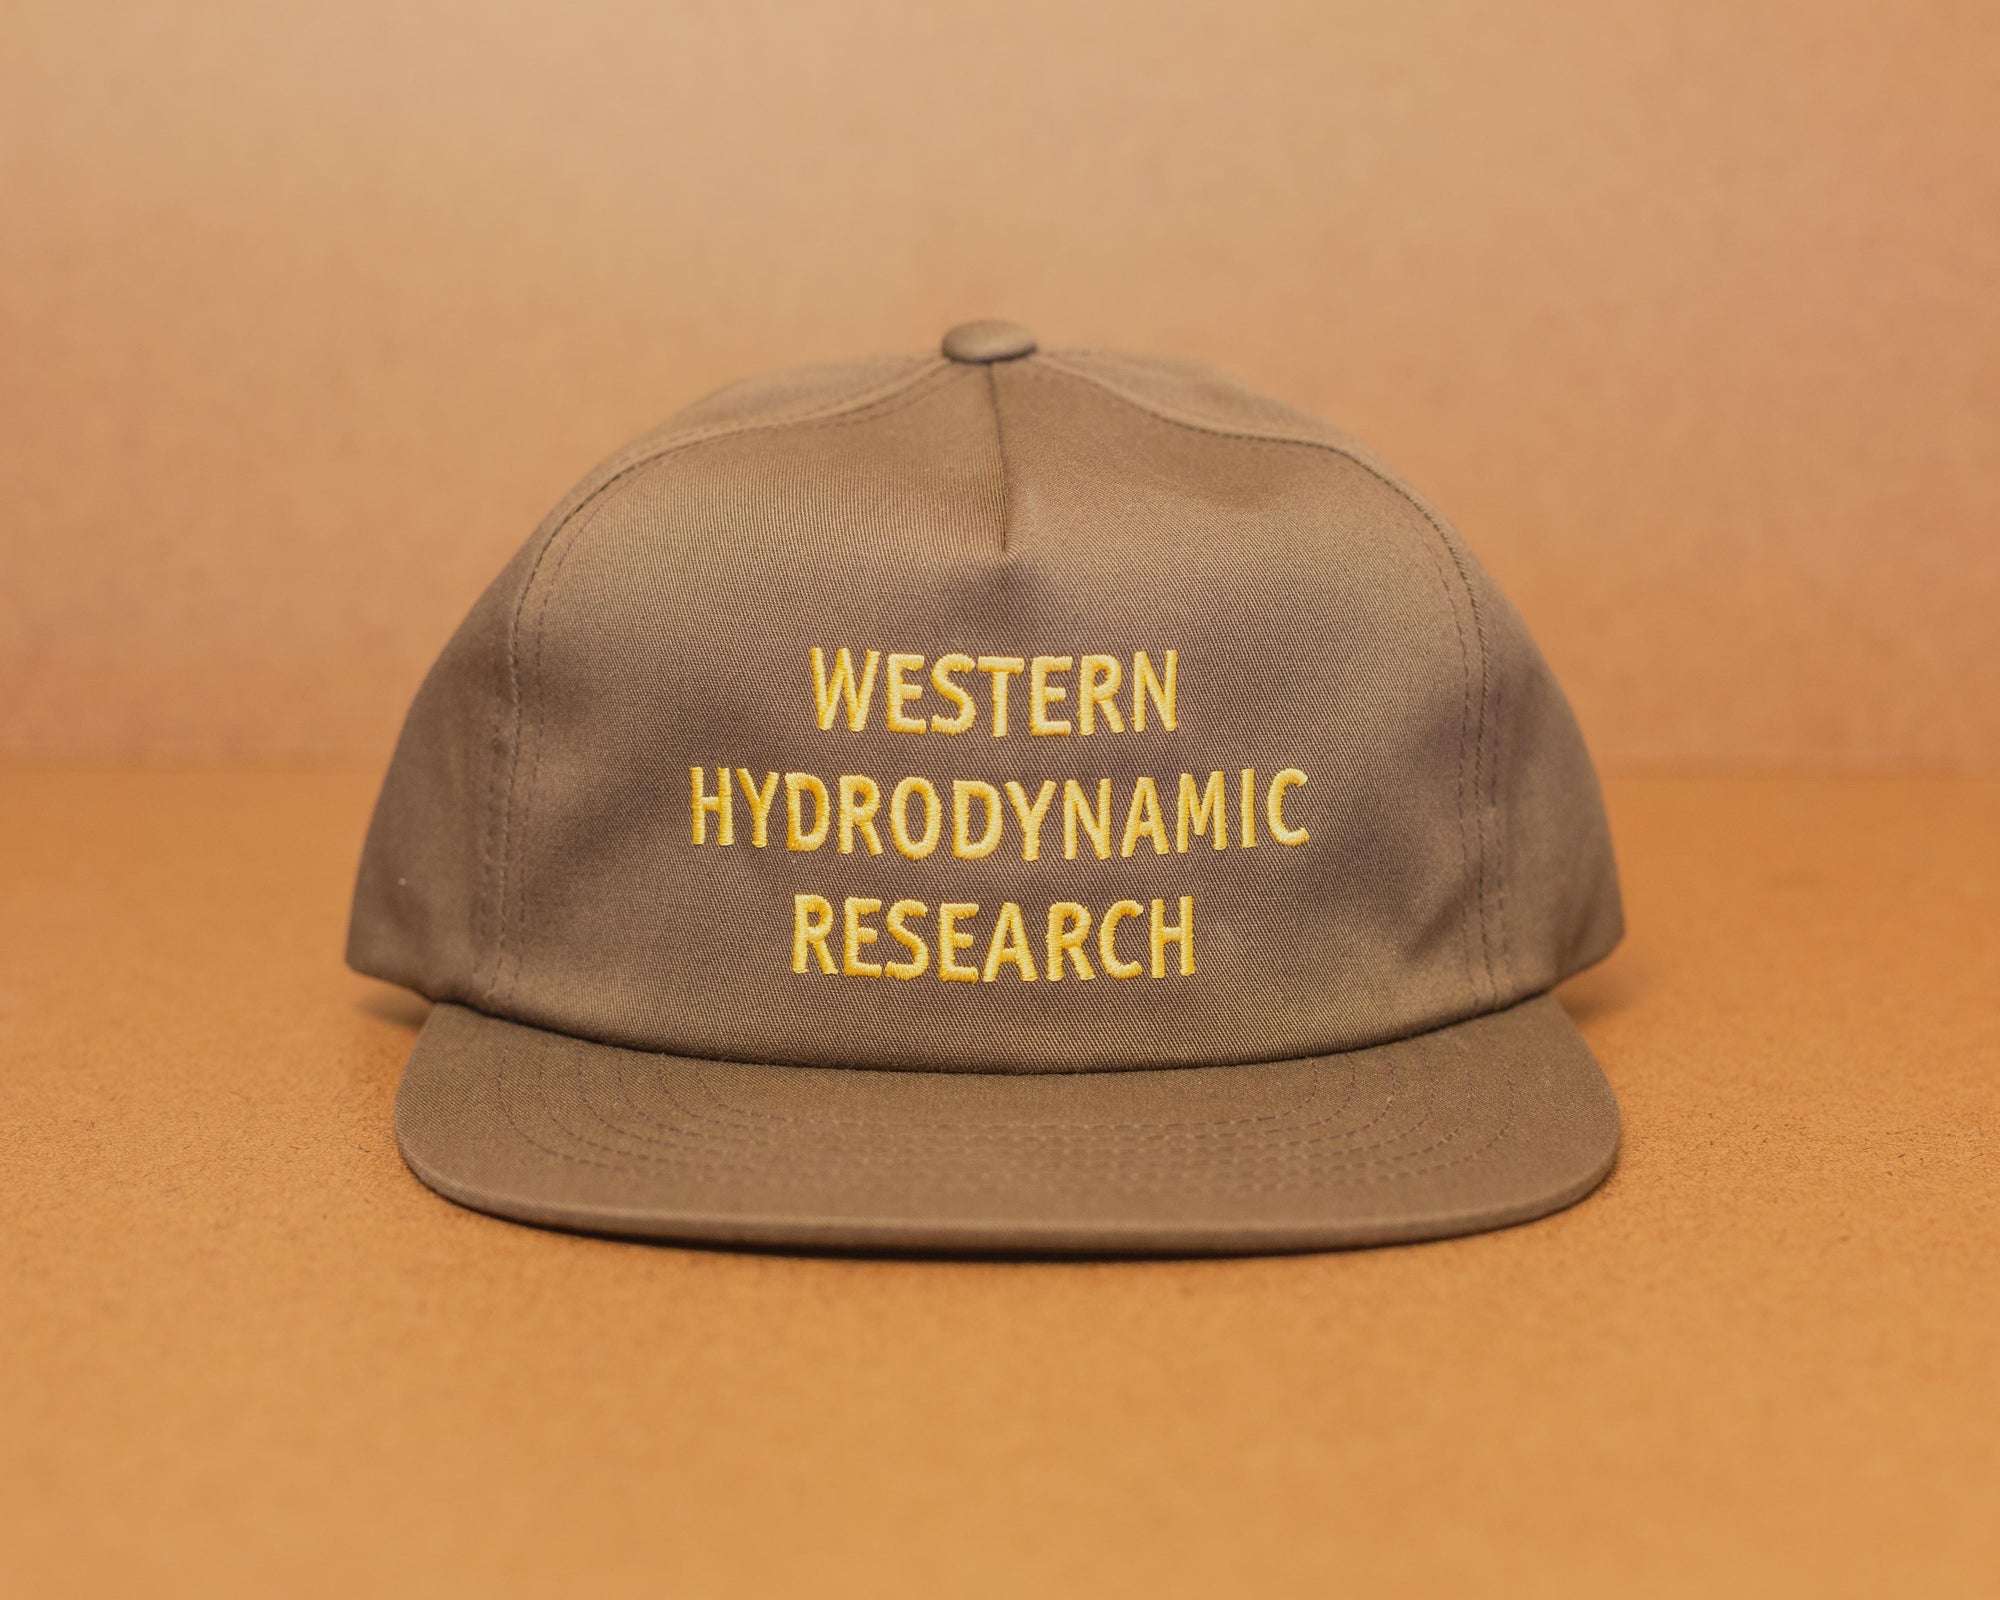 Western Hydrodynamic Research- Canvas Promotional Hat (Brown) front view